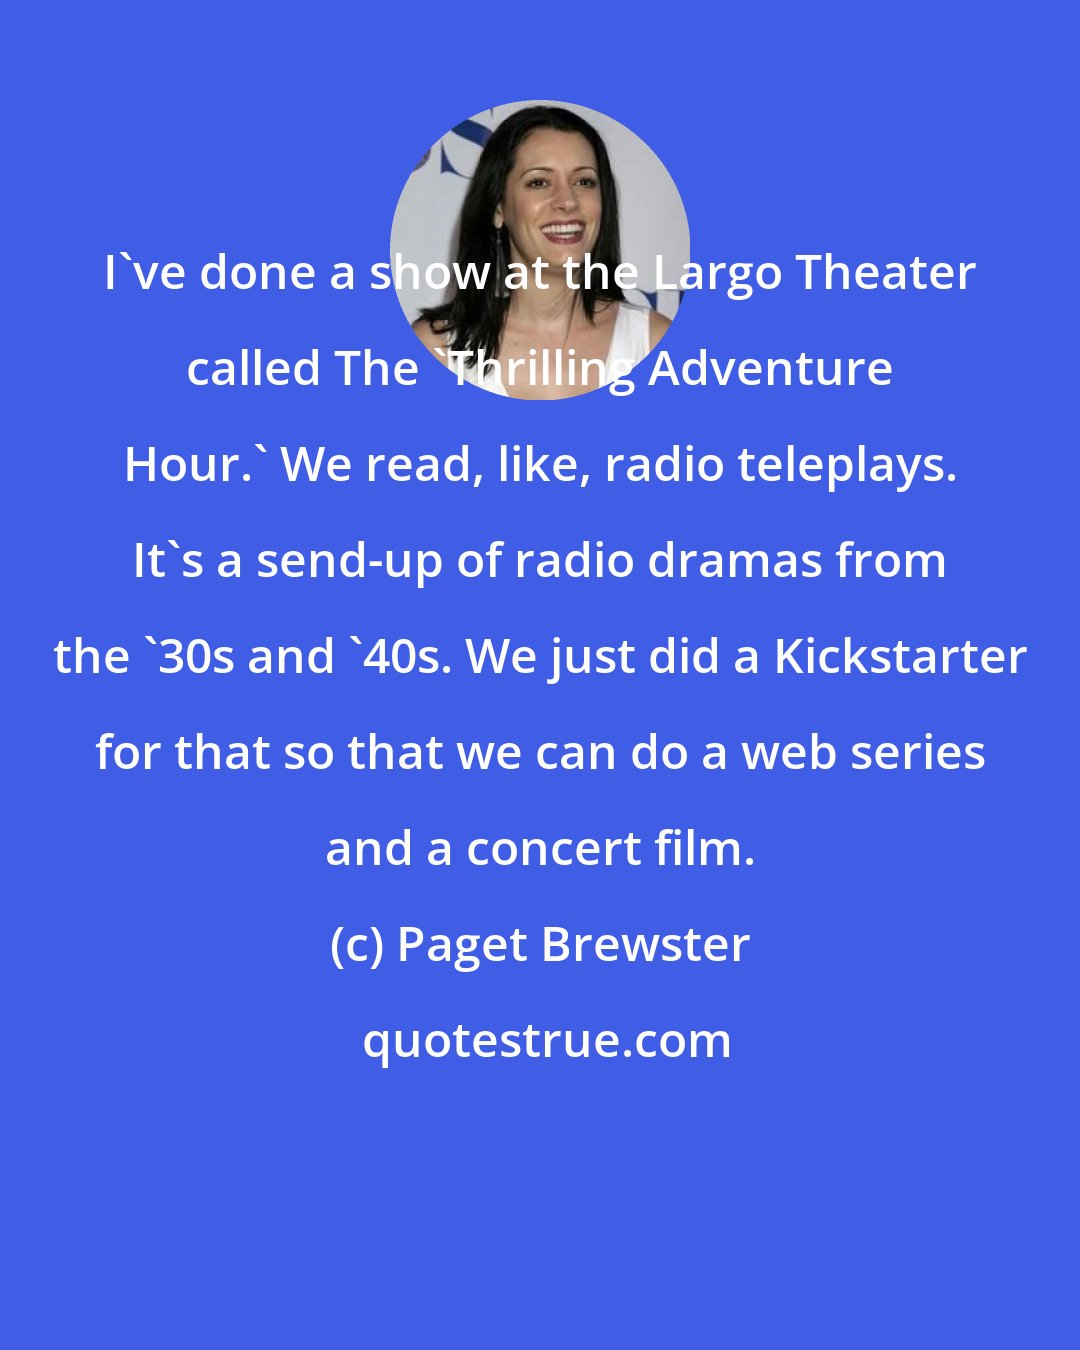 Paget Brewster: I've done a show at the Largo Theater called The 'Thrilling Adventure Hour.' We read, like, radio teleplays. It's a send-up of radio dramas from the '30s and '40s. We just did a Kickstarter for that so that we can do a web series and a concert film.